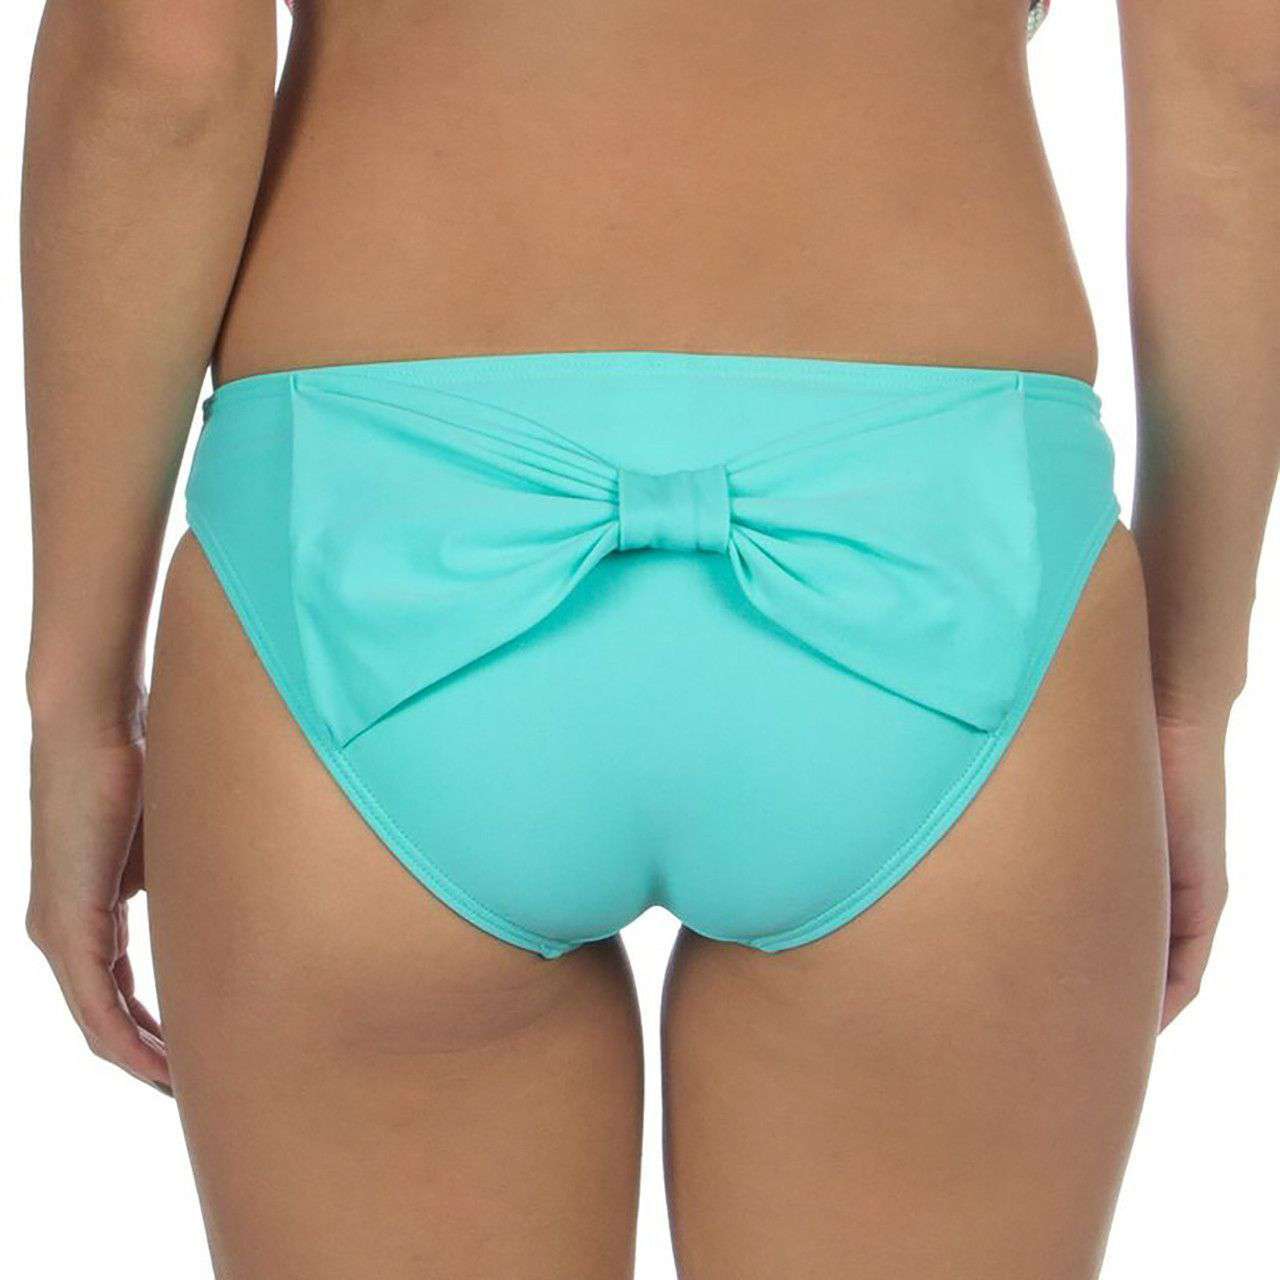 Solid Bow Back Hipster Bikini Bottoms in Aqua by Lauren James - Country Club Prep